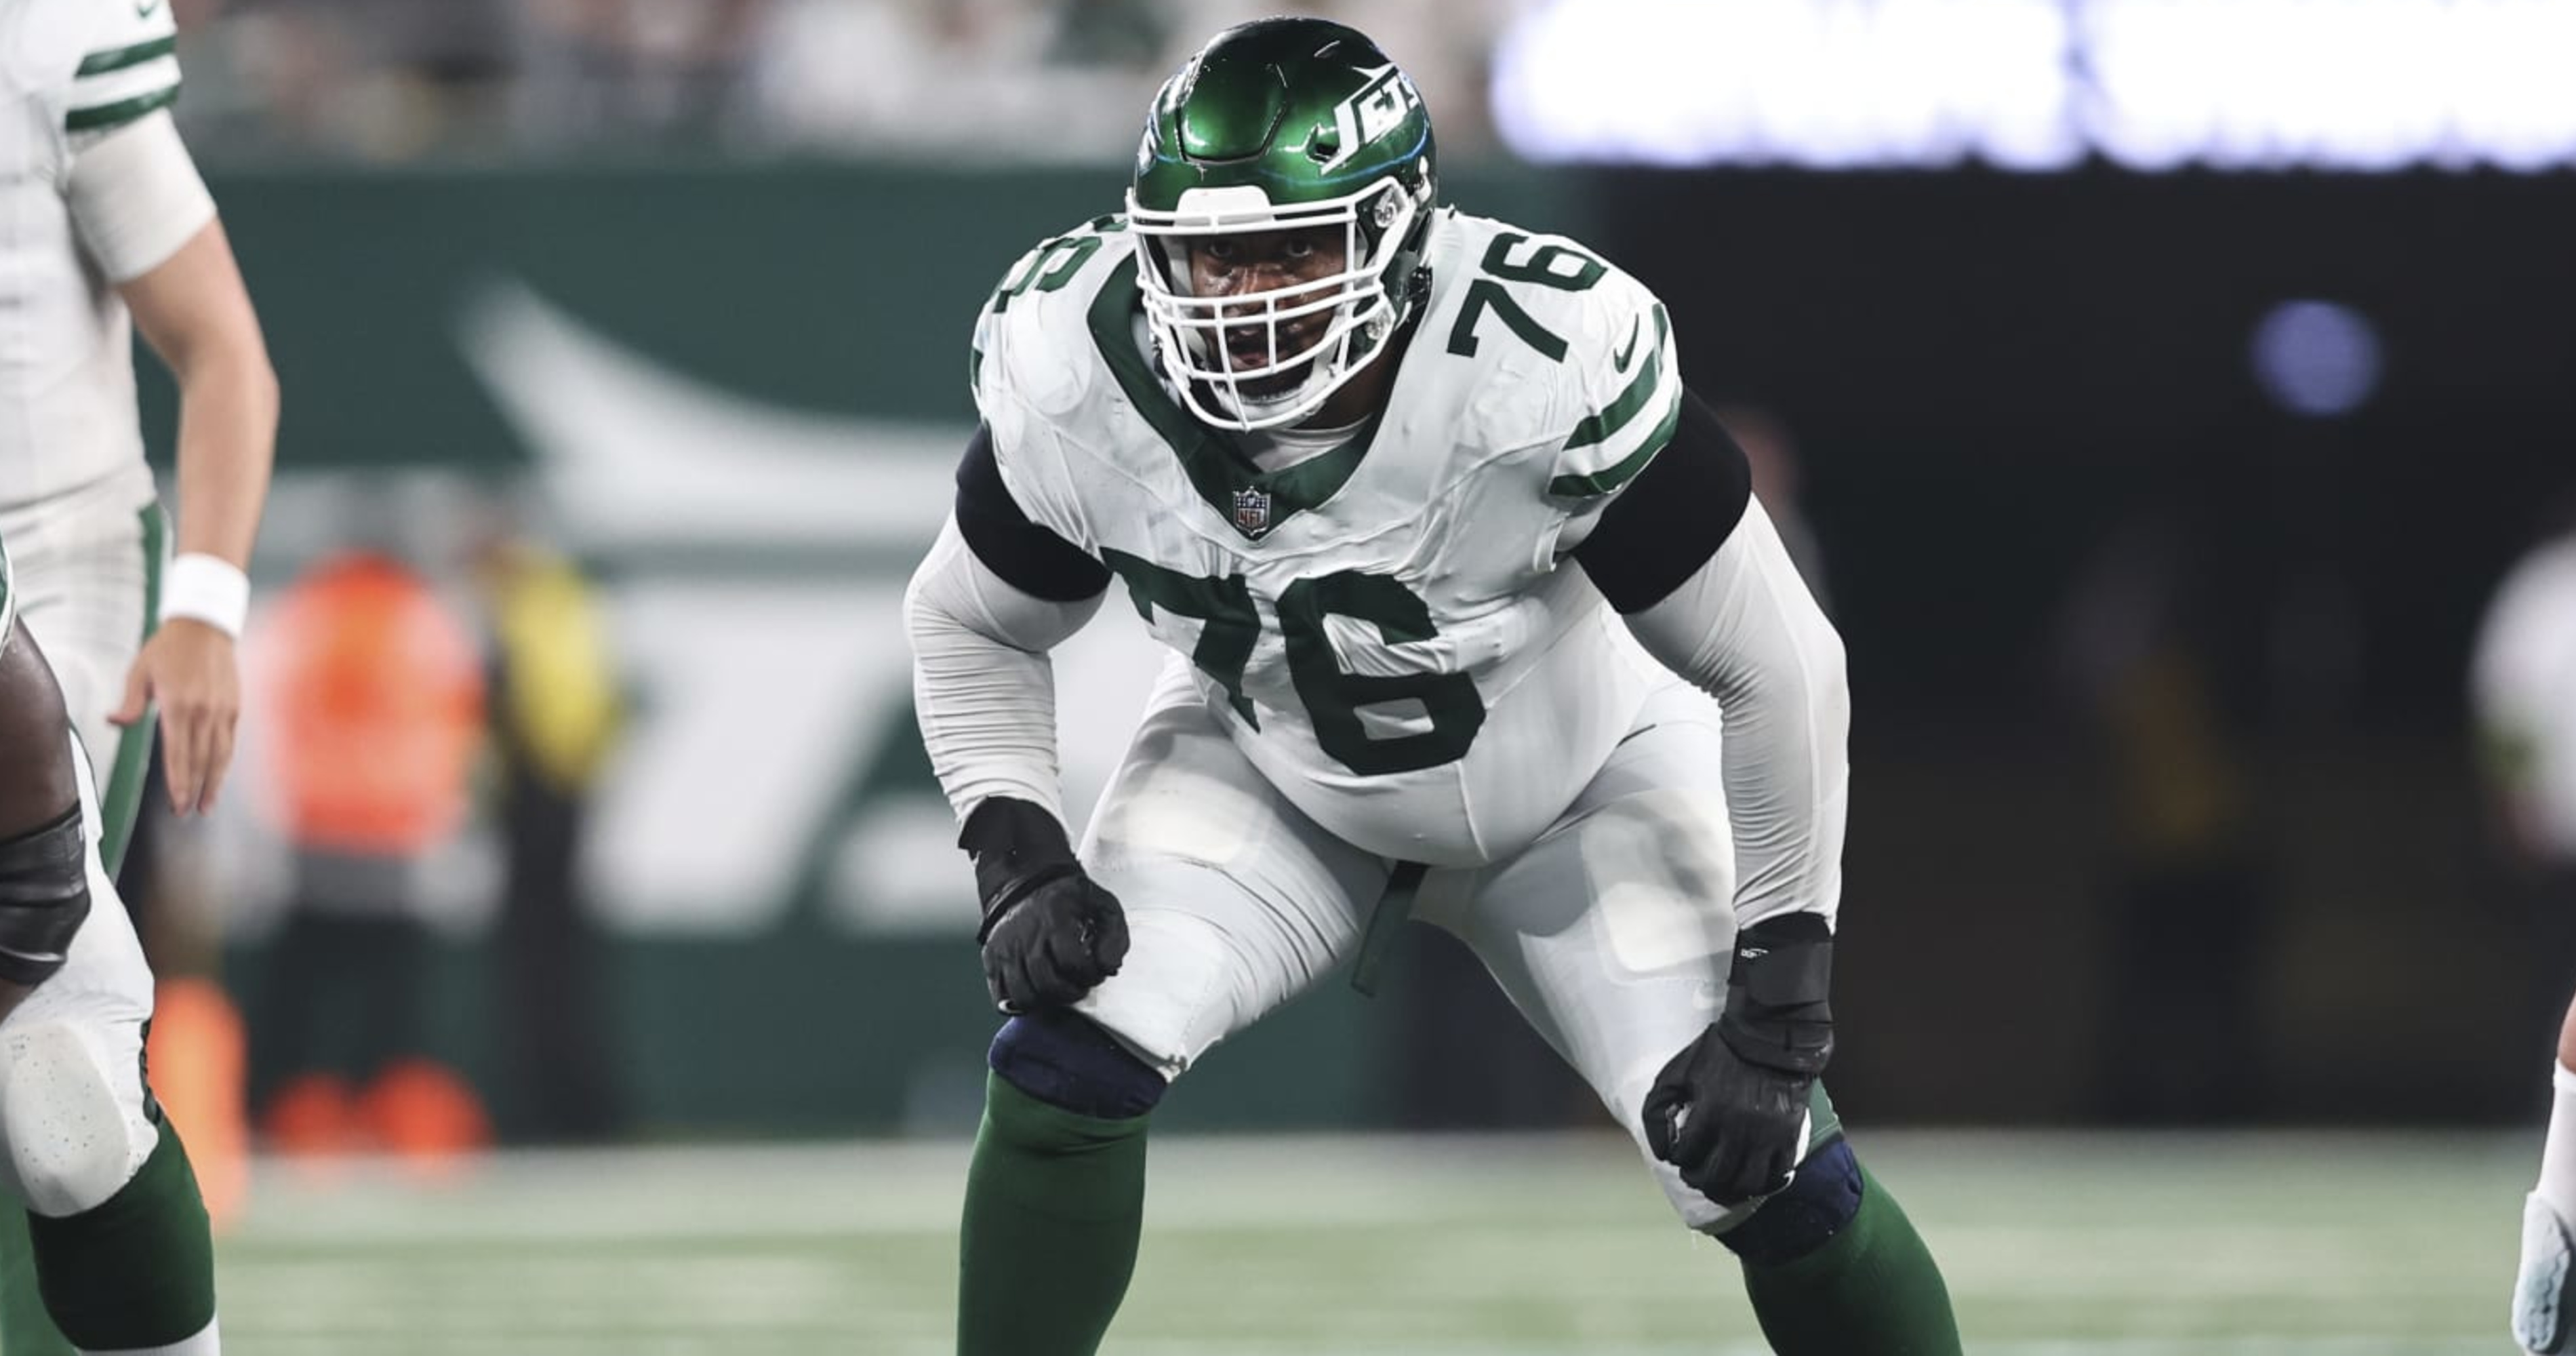 Jets' Duane Brown Returns to Practice amid Recovery from Surgery on Shoulder Injury